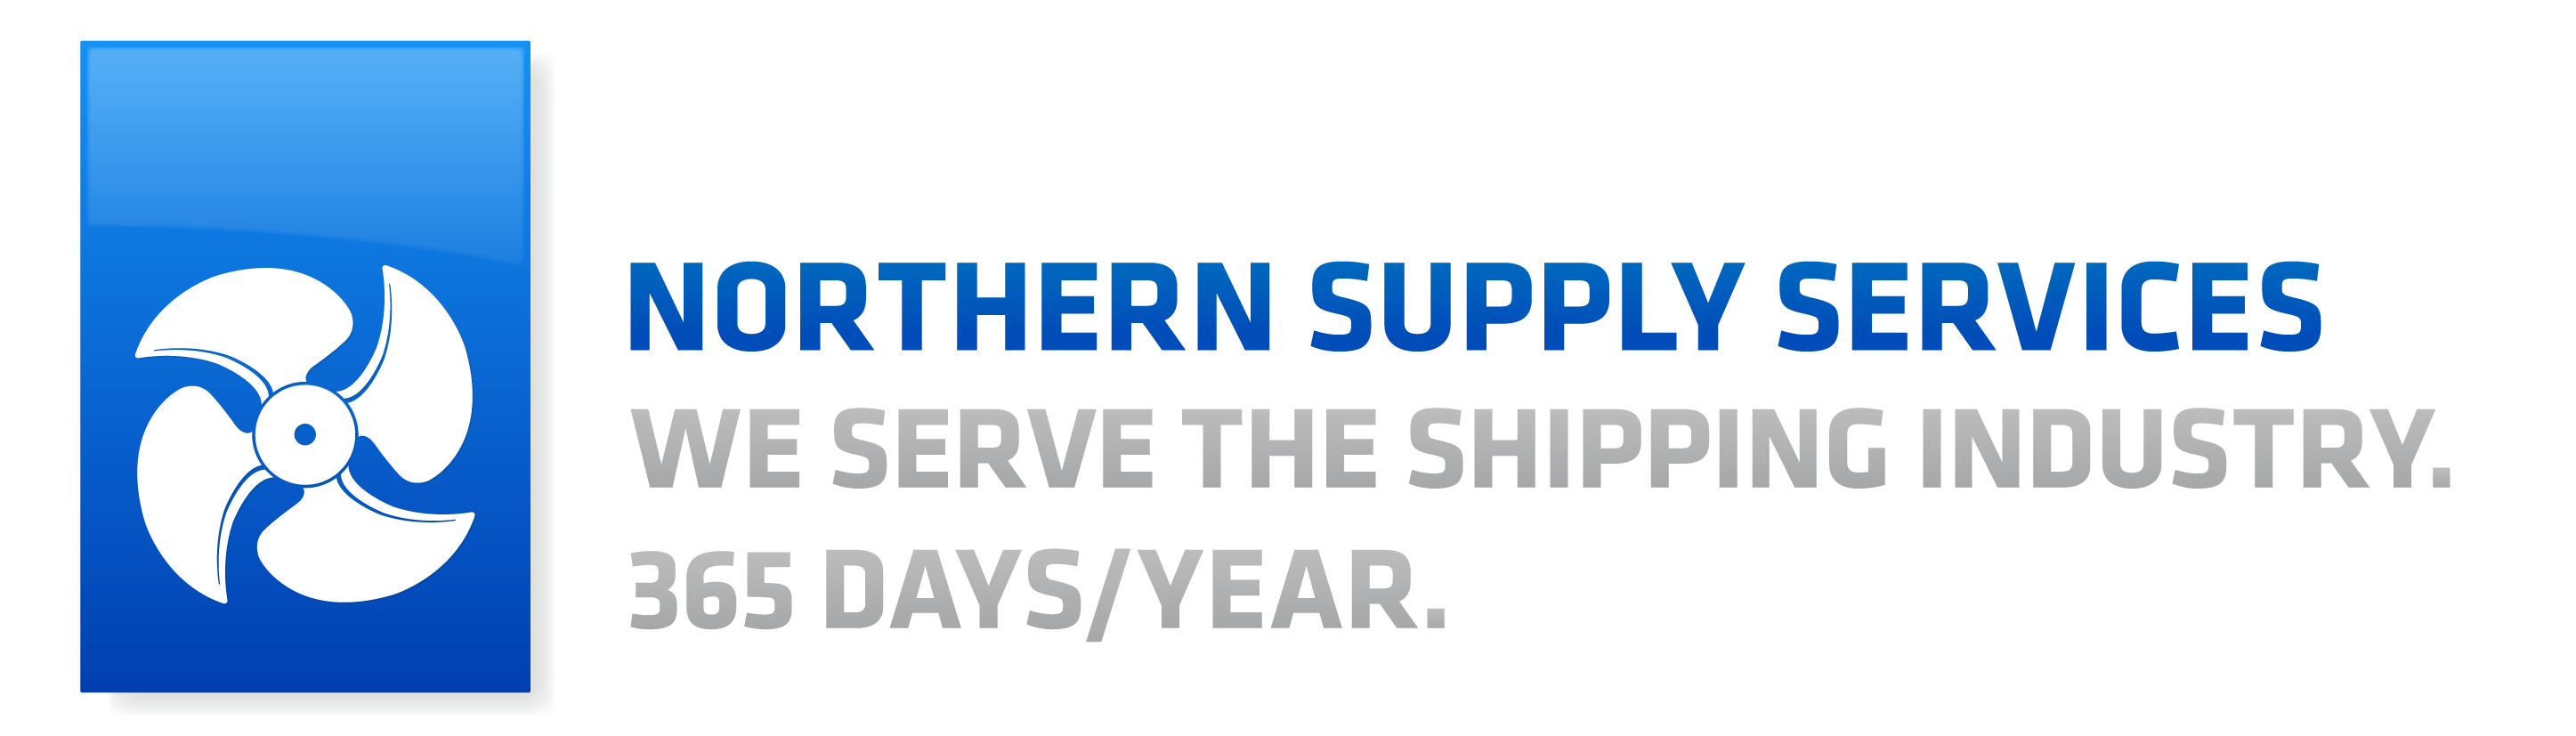 NORTHERN SUPPLY SERVICES WE SERVE THE SHIPPING INDUSTRY. 365 DAYS/YEAR.